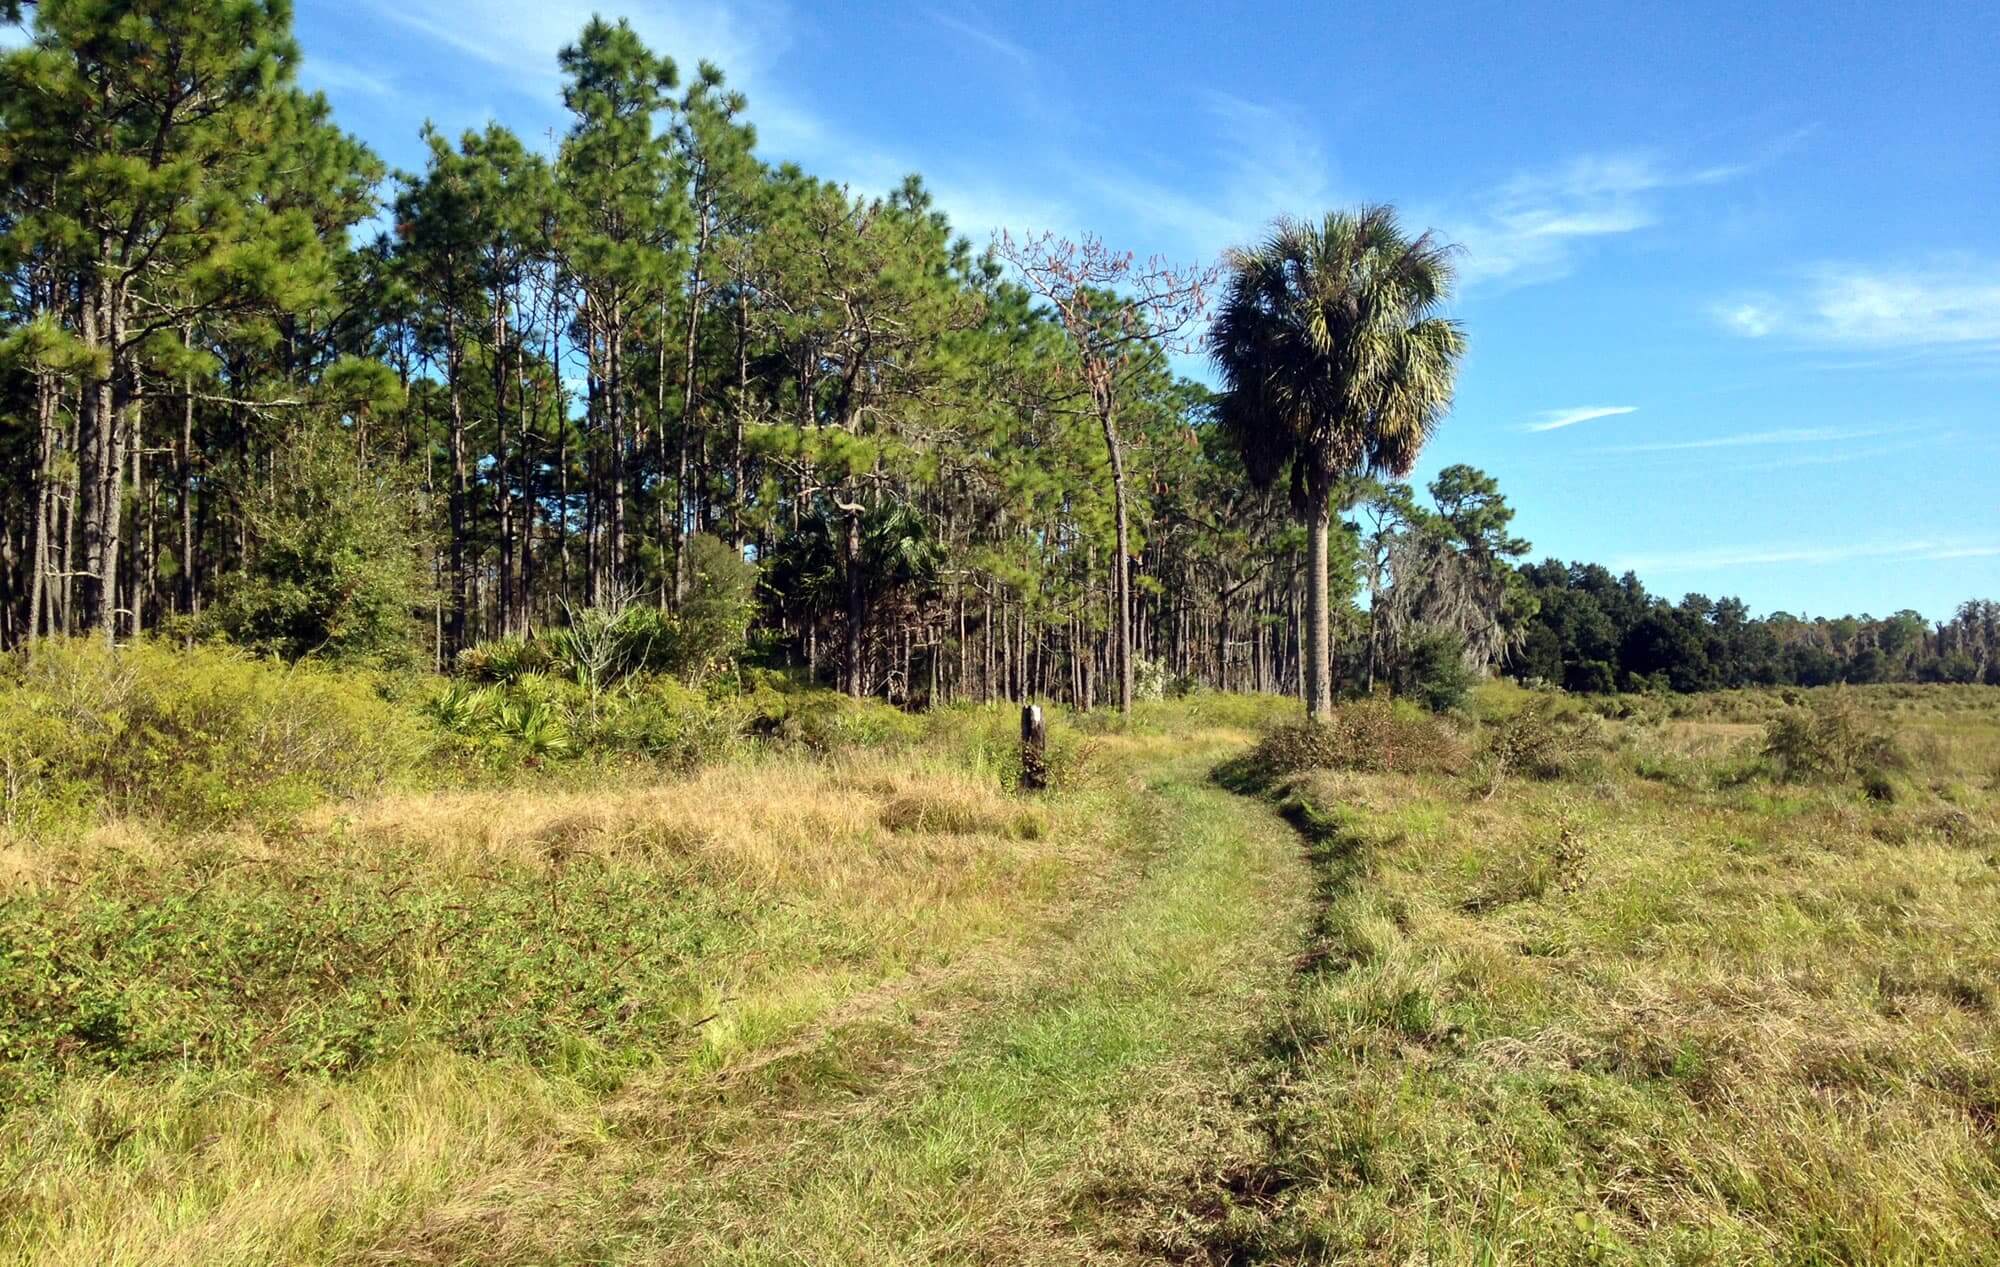 hiking trail in the middle tree grouping on left and open pasture on right at Colt Creek State Park in Lakeland, FL